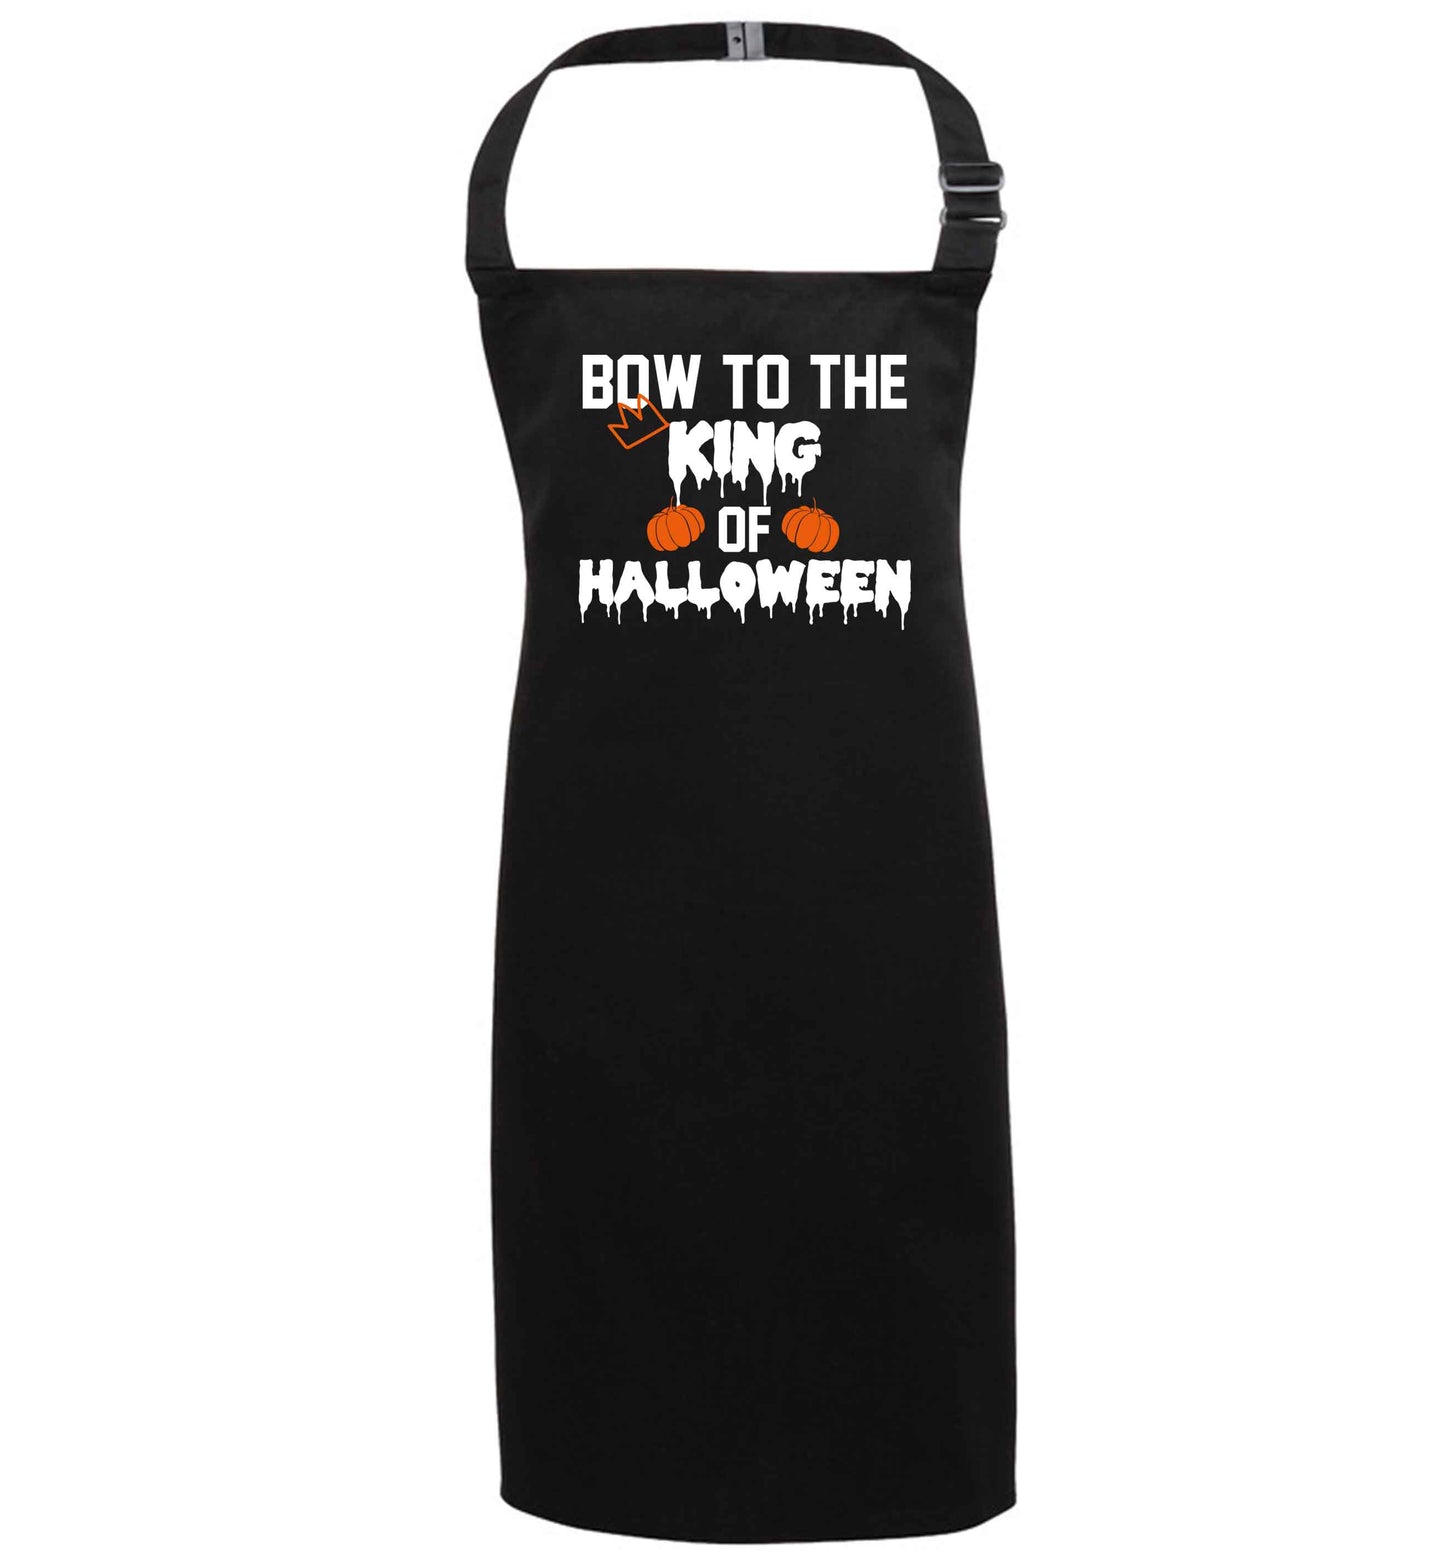 Bow to the King of halloween black apron 7-10 years